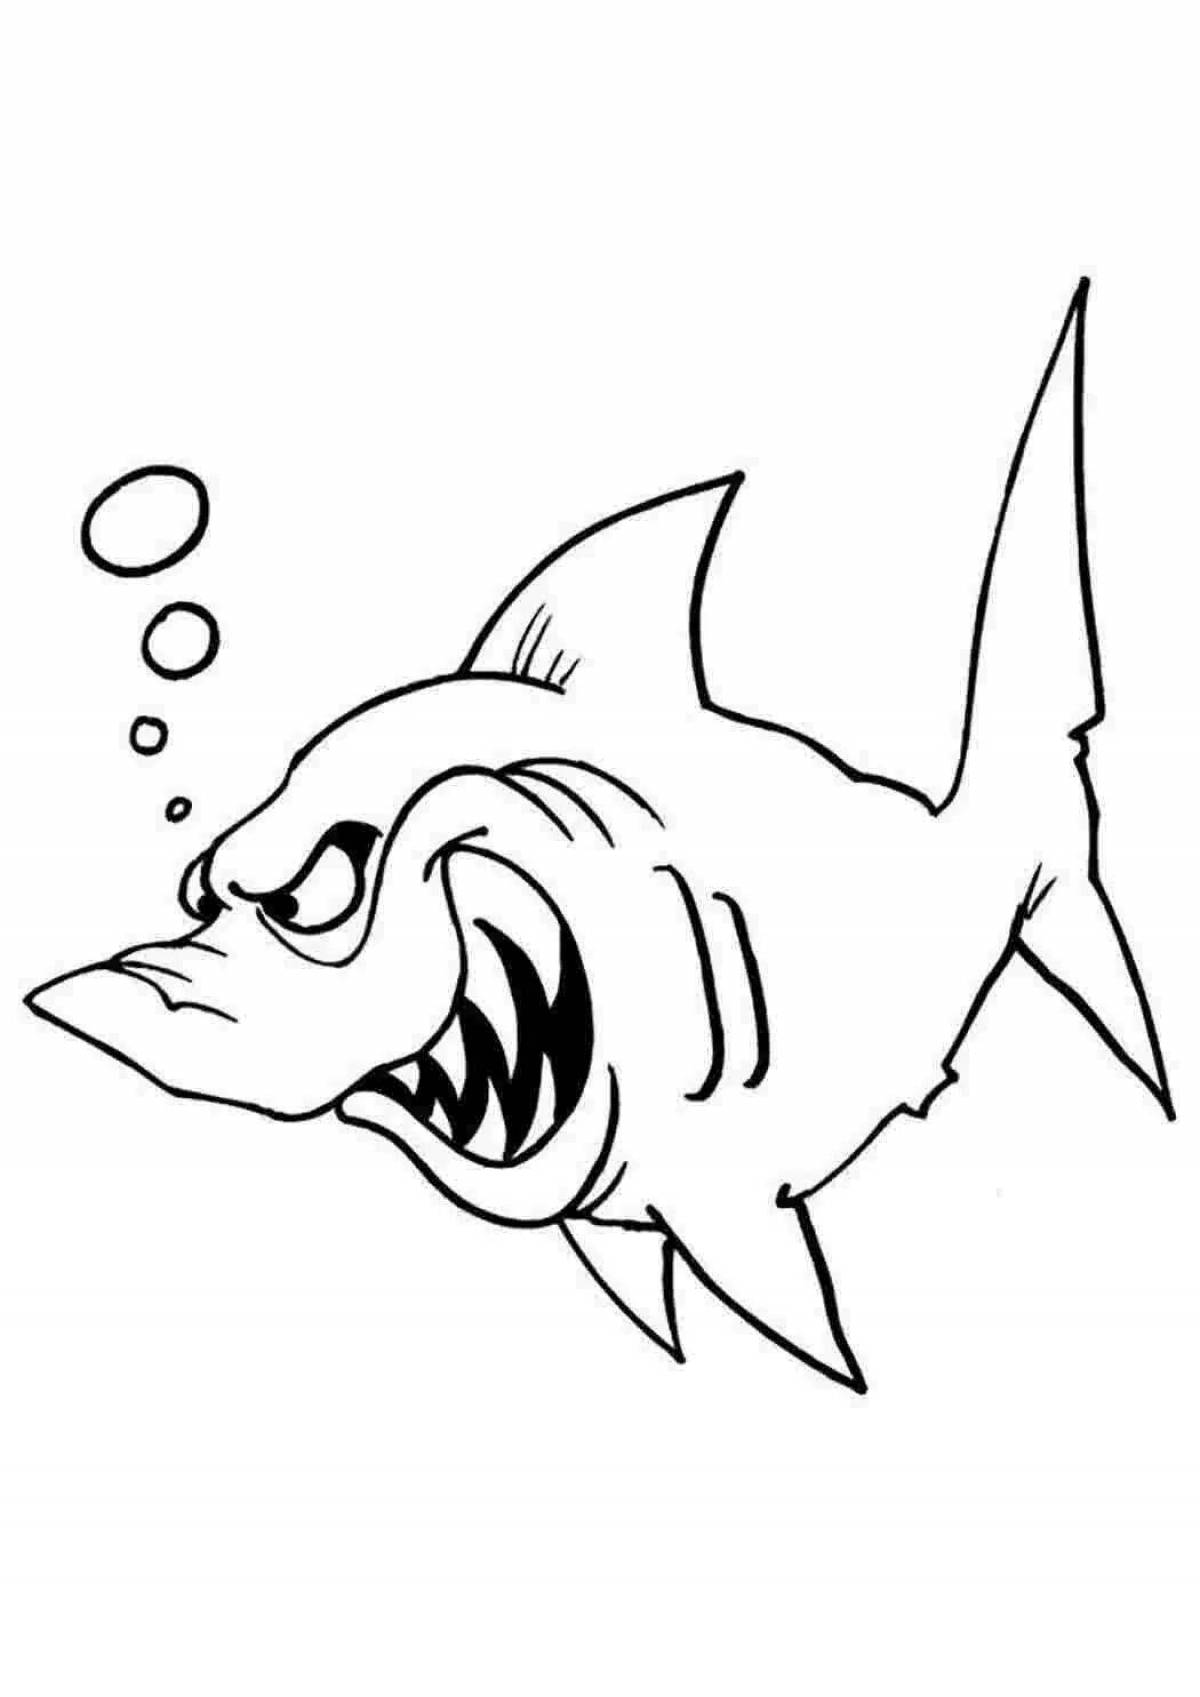 Colourful shark coloring page